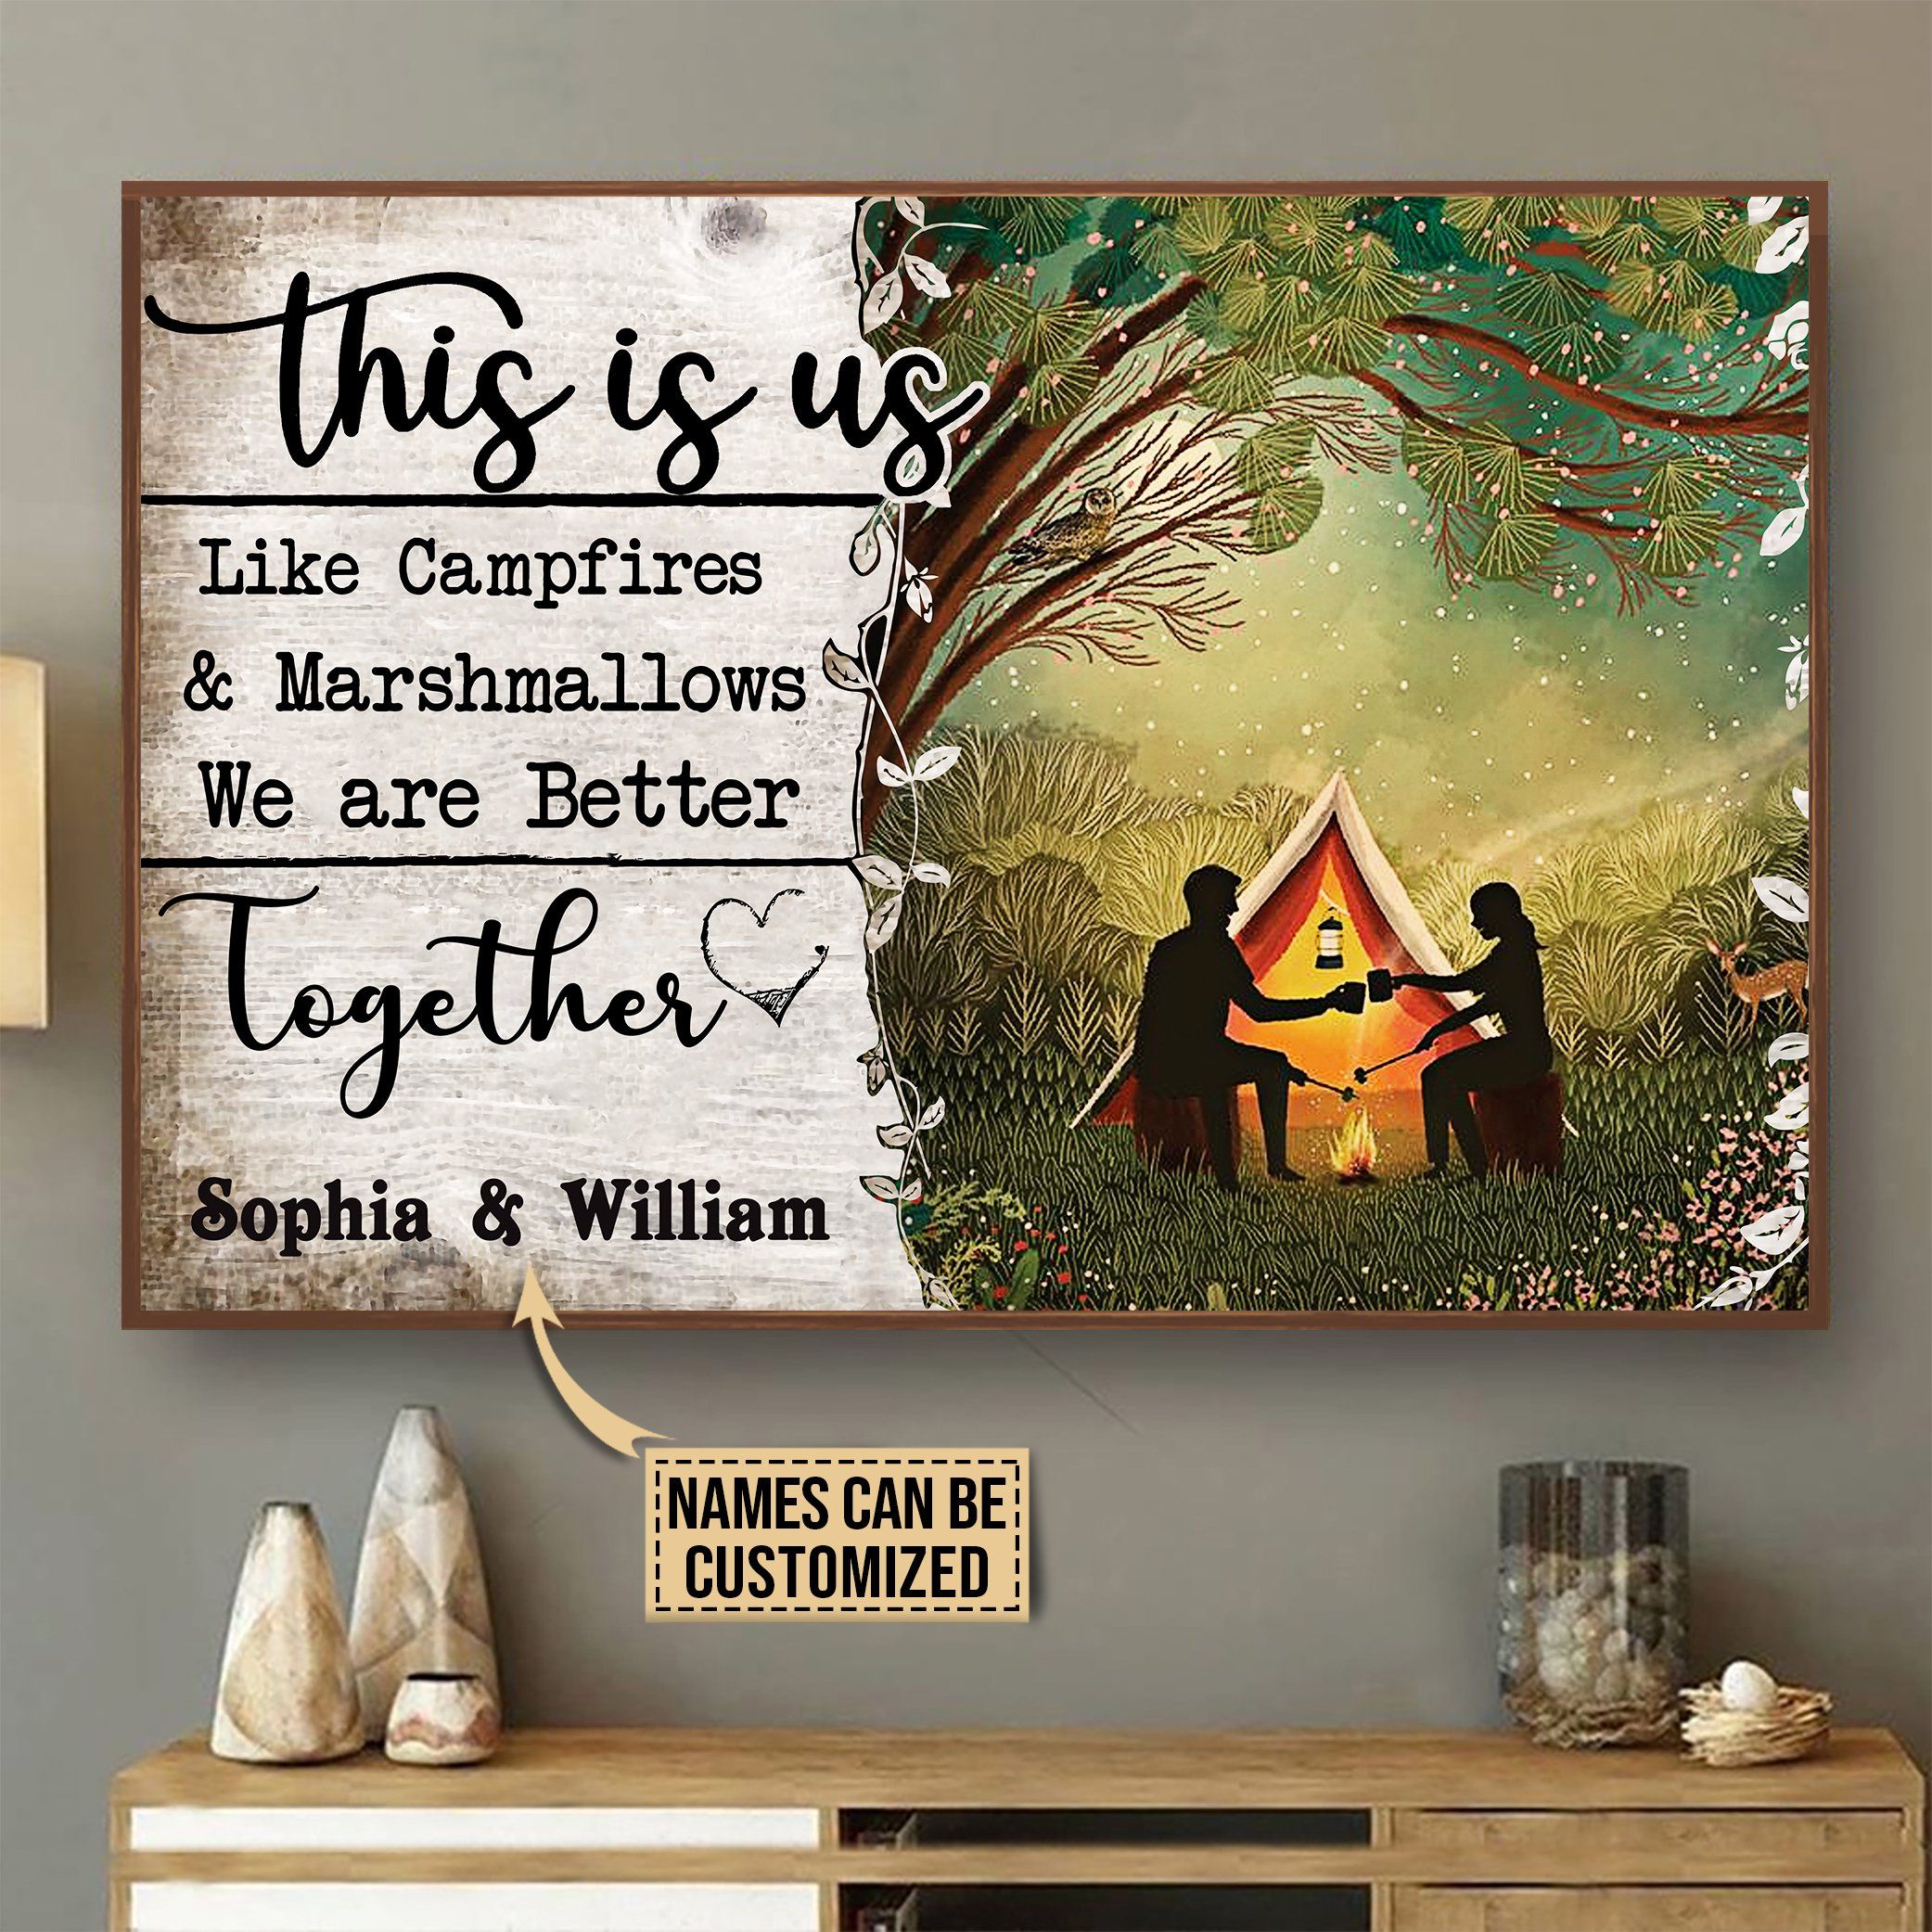 Personalized Camping Campfire And Marshmallos Poster